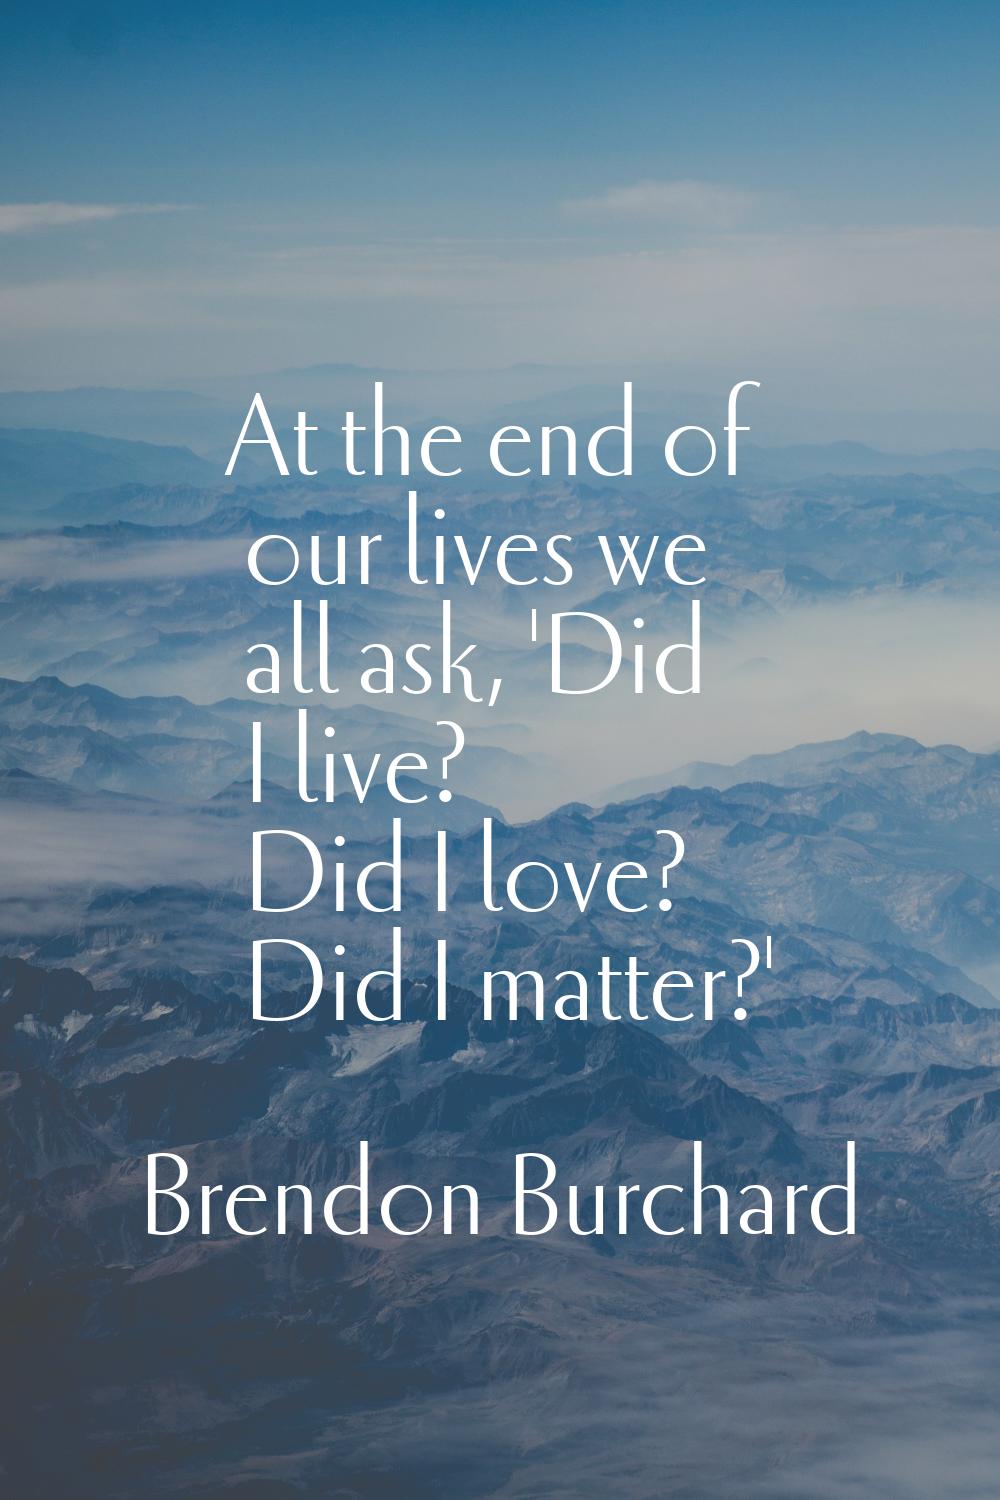 At the end of our lives we all ask, 'Did I live? Did I love? Did I matter?'